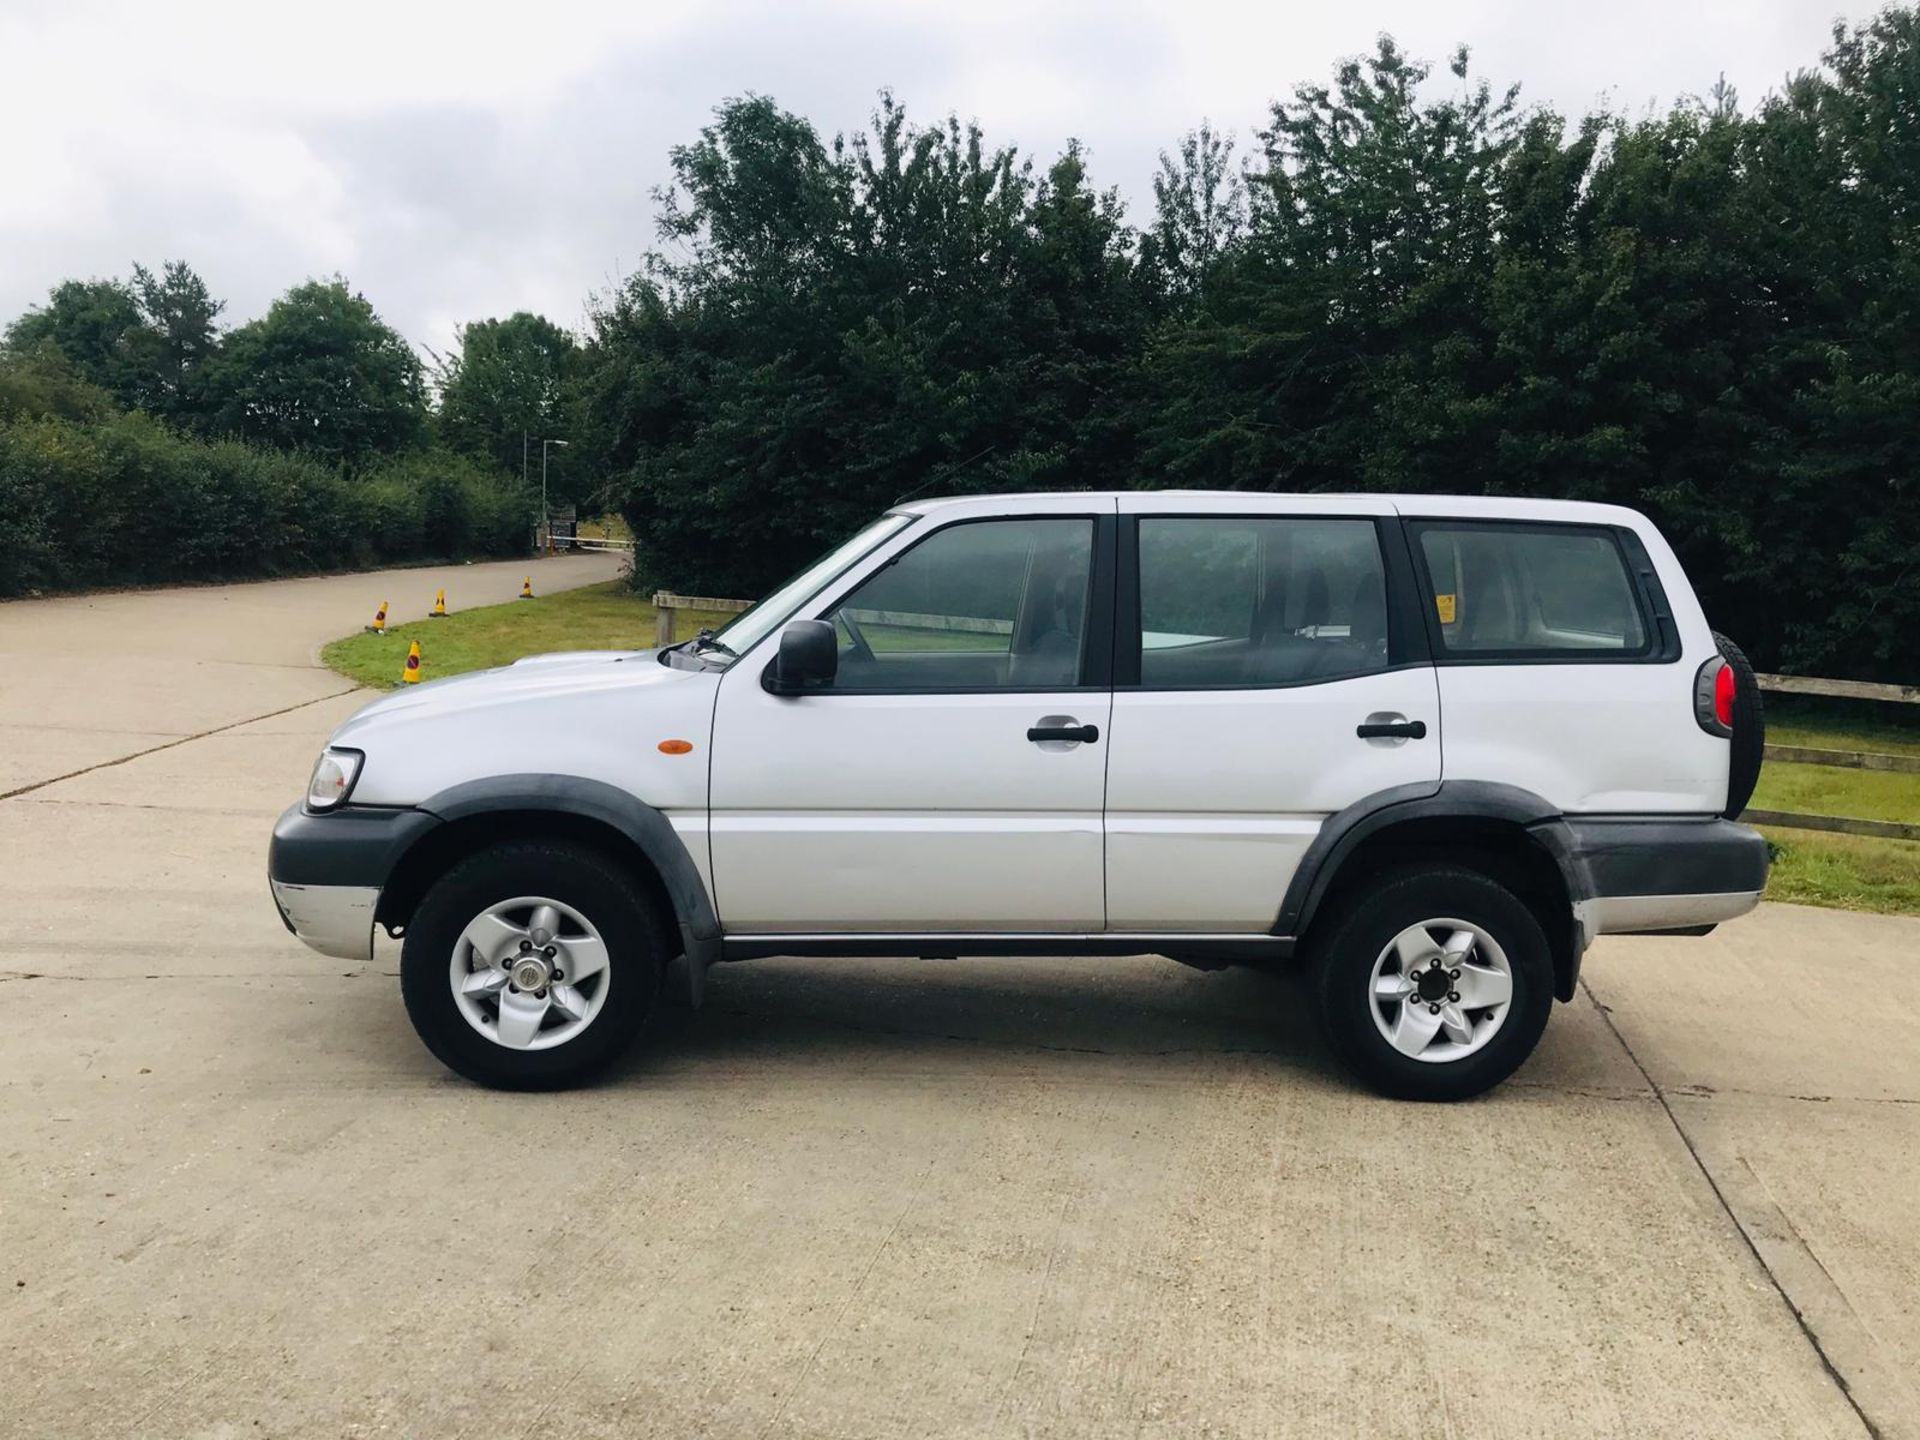 (RESERVE MET) Nissan Torano 2 2.7 (4x4) - 2003 03 Reg - 7 Seats - 1 Owner From New - ONLY 73k Miles - Image 2 of 21